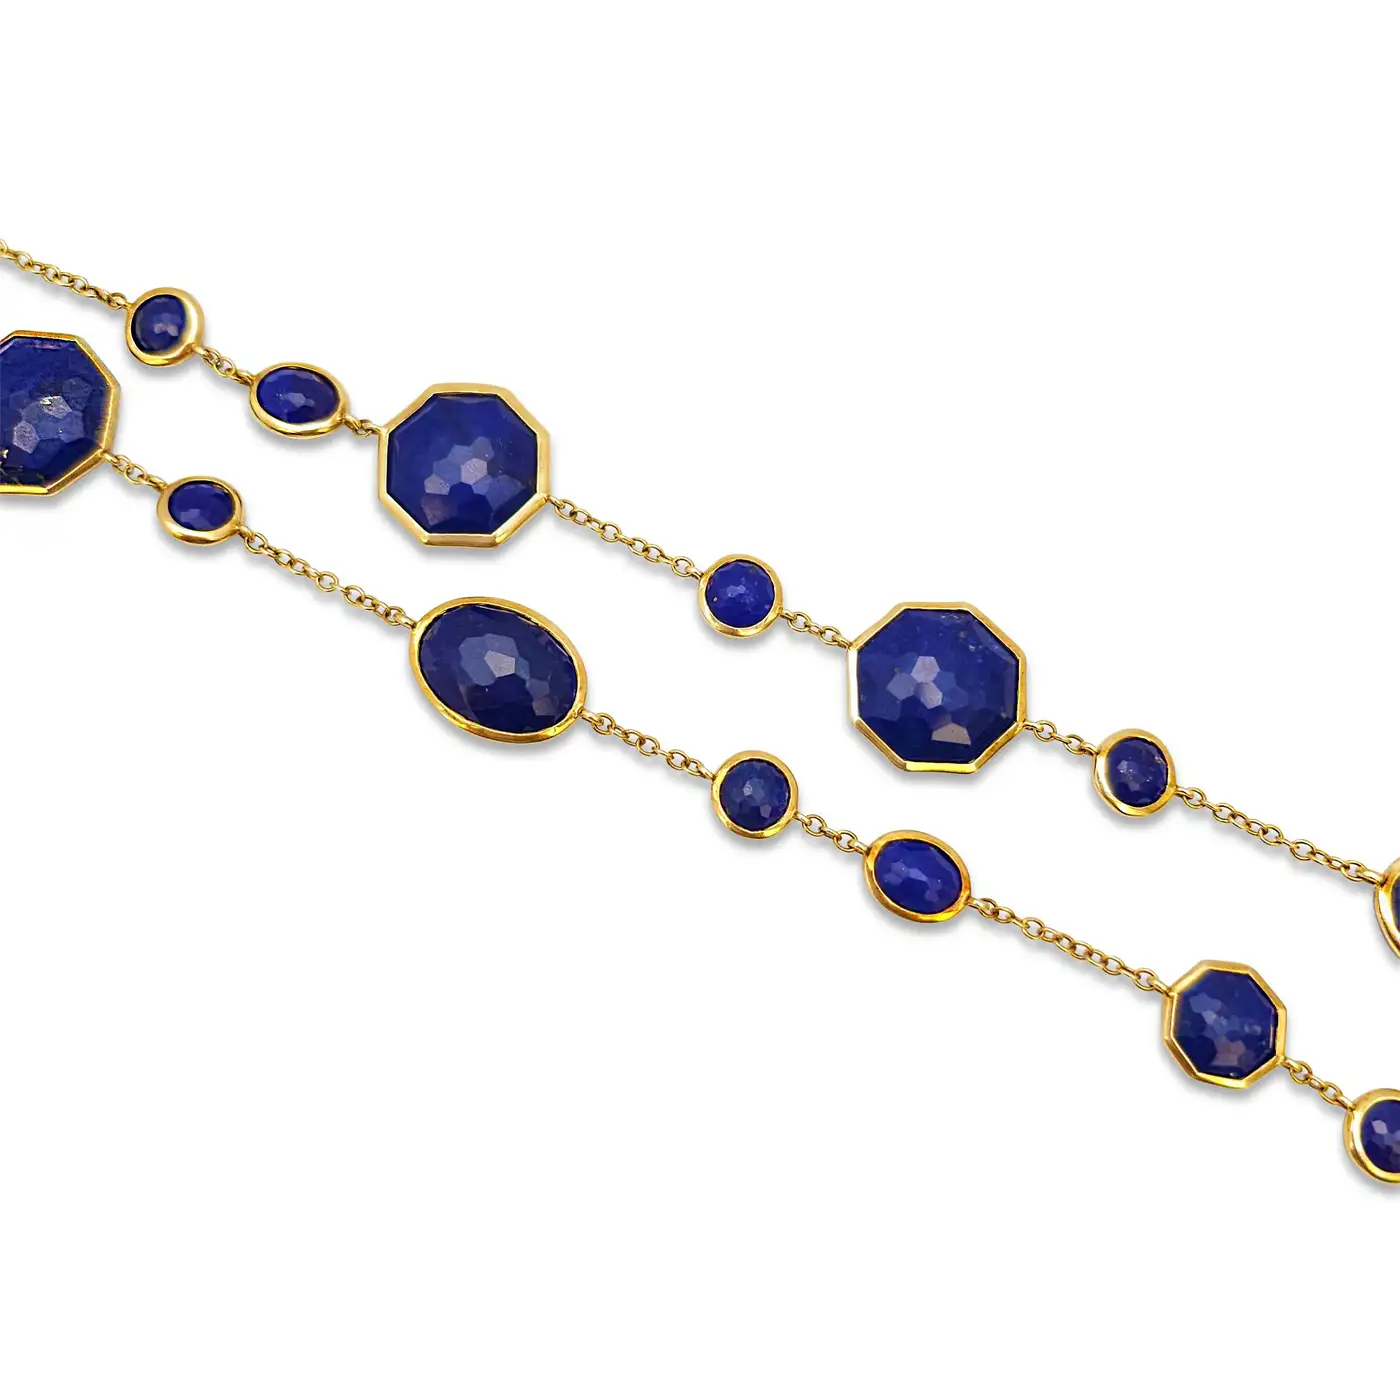 Ippolita-Rock-Sweets-Lolly-Gold-and-Lapis-Necklace-4.webp